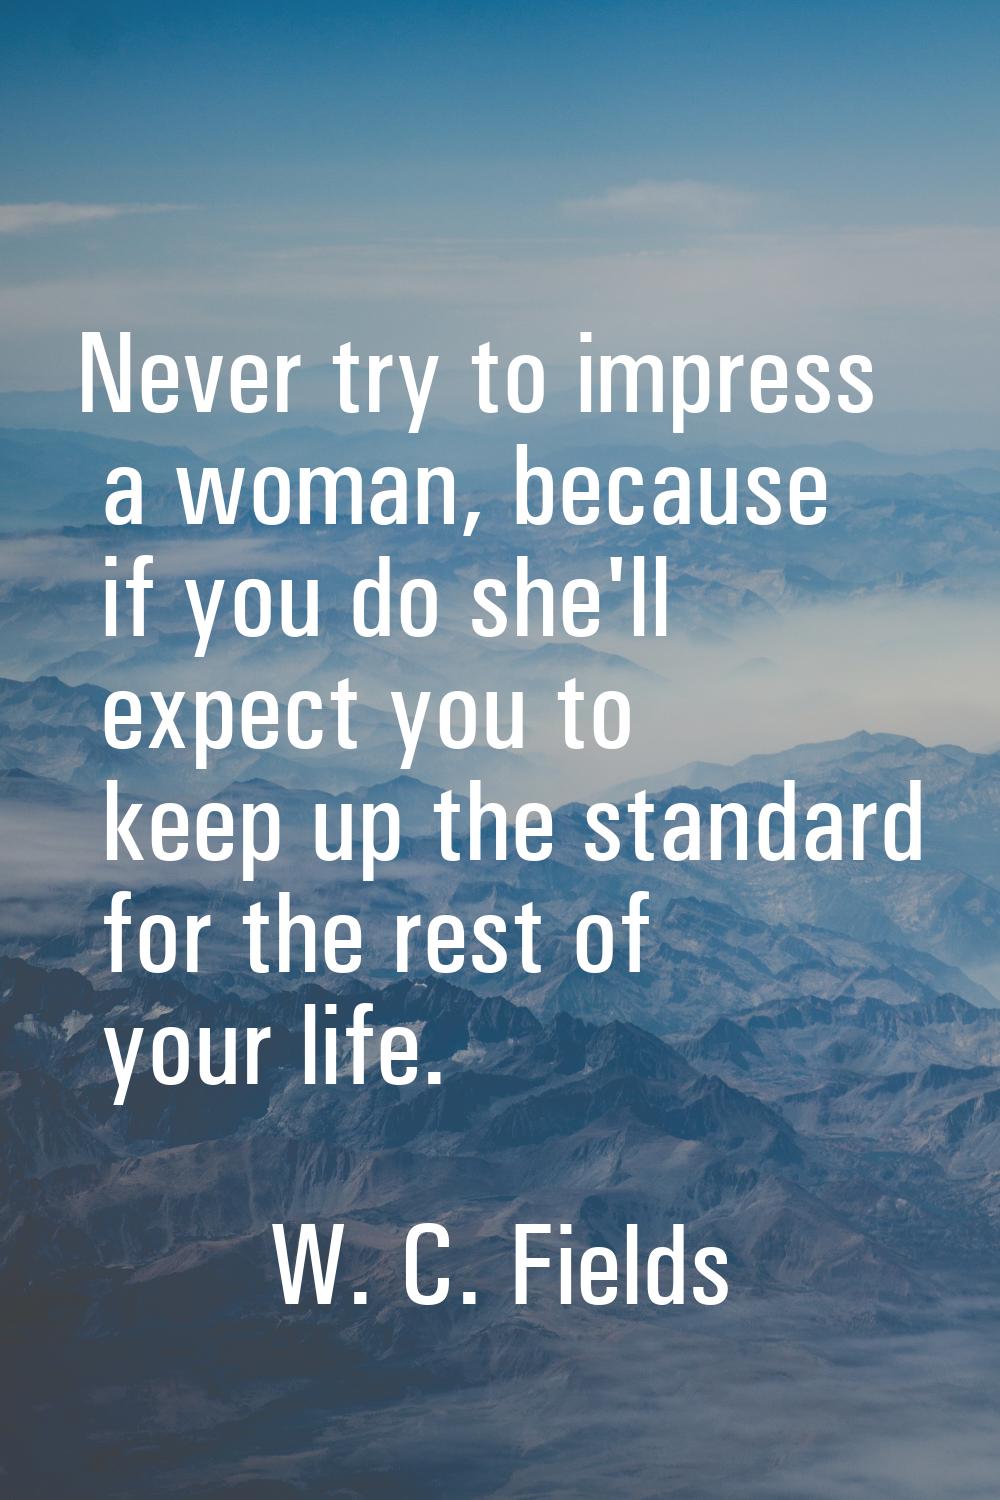 Never try to impress a woman, because if you do she'll expect you to keep up the standard for the r